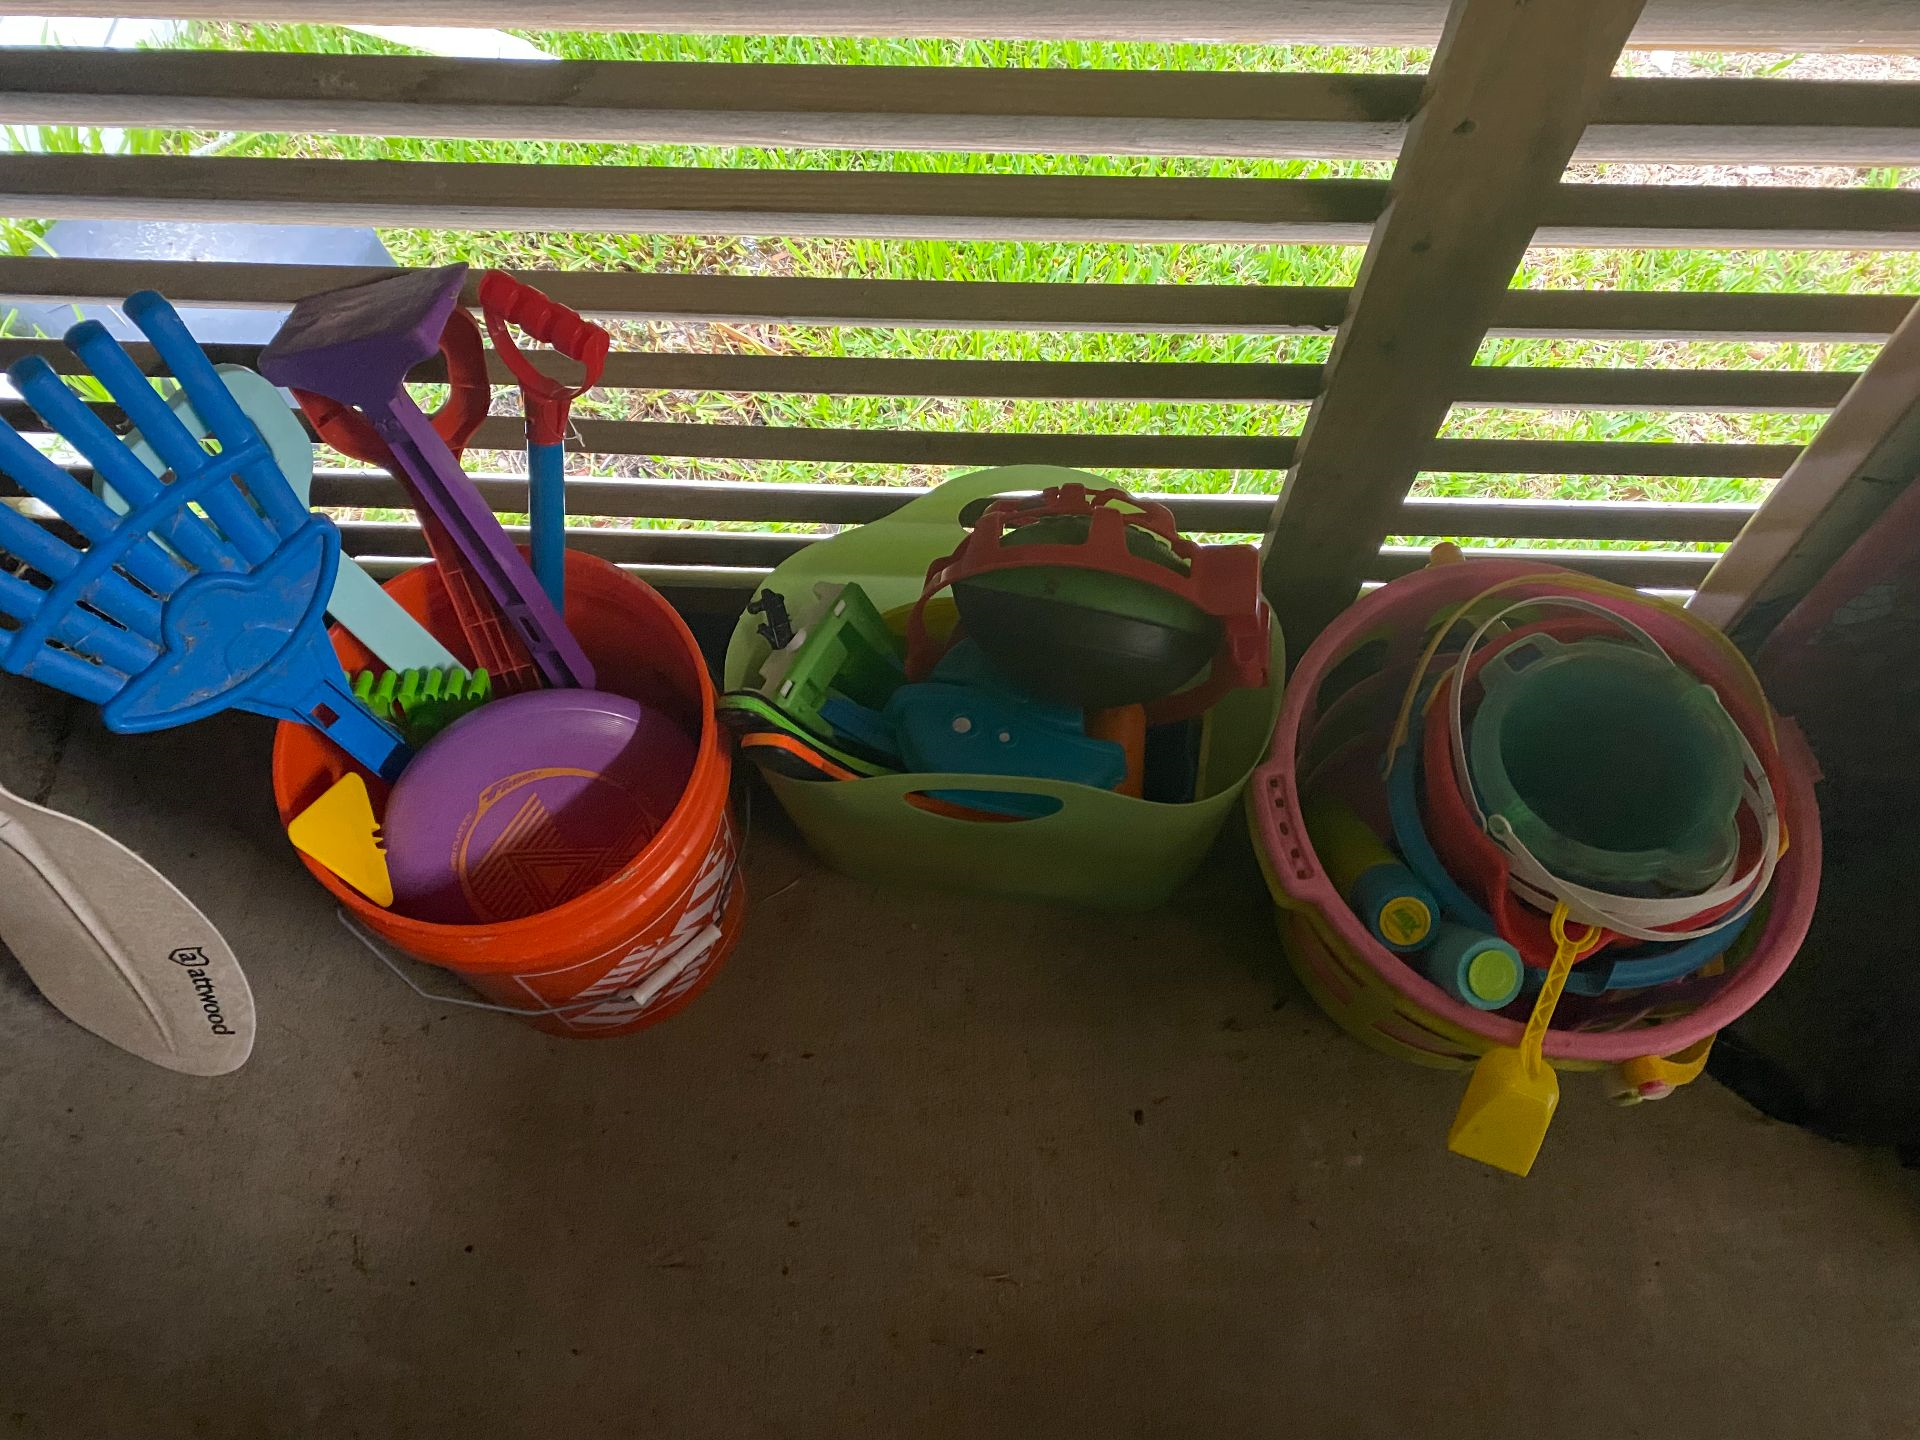 beach buckets, shovels, frisbees, and more